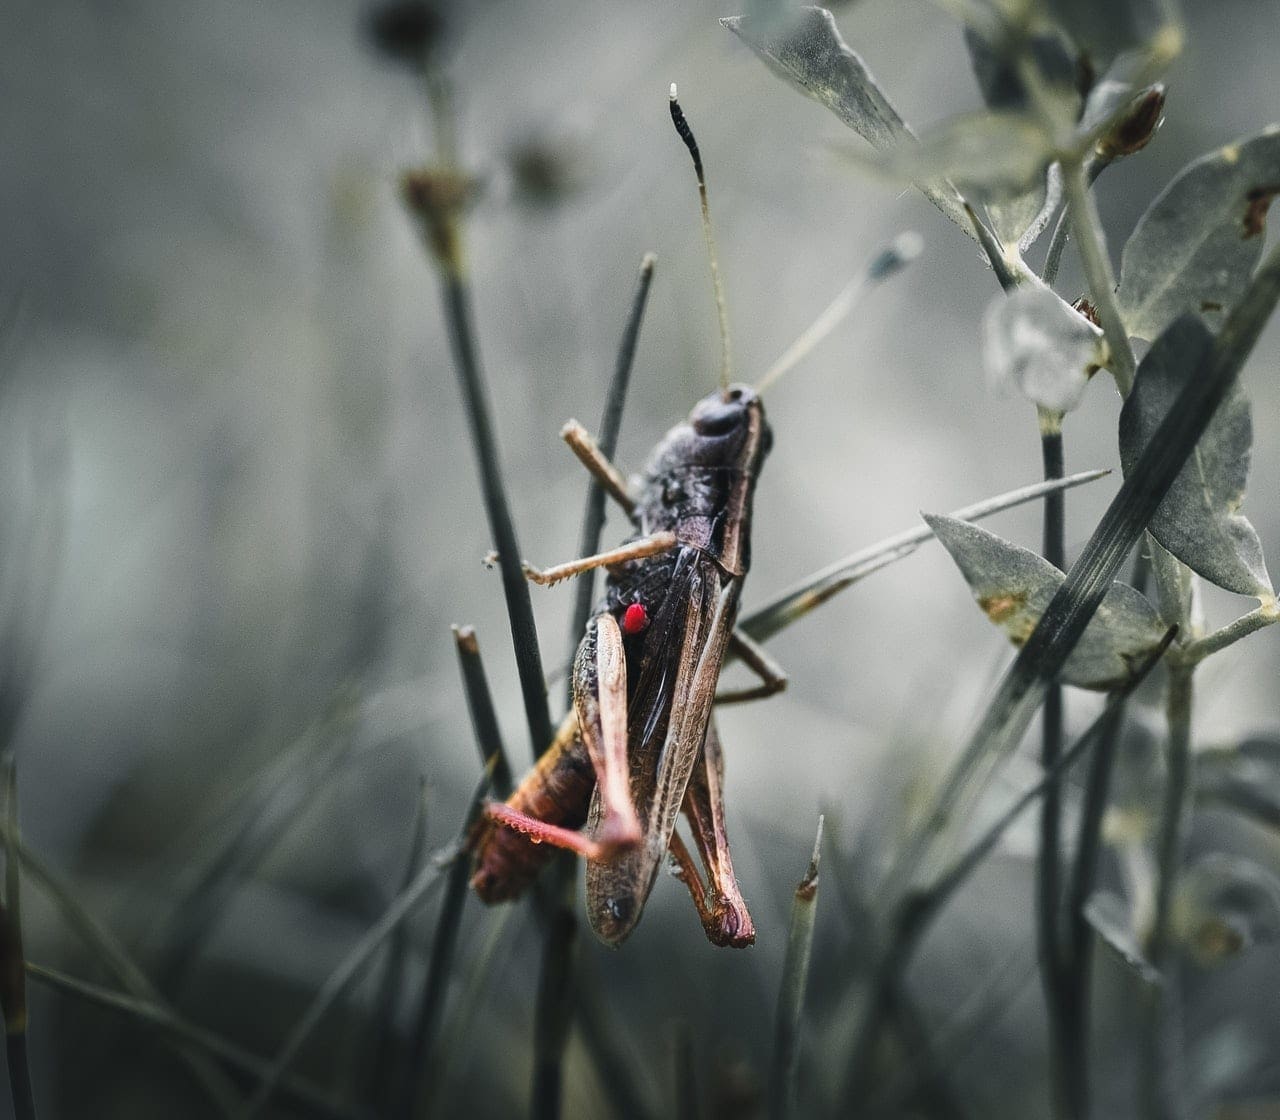 Locust as plague or protein - photo by Photo by cmonphotography from Pexels